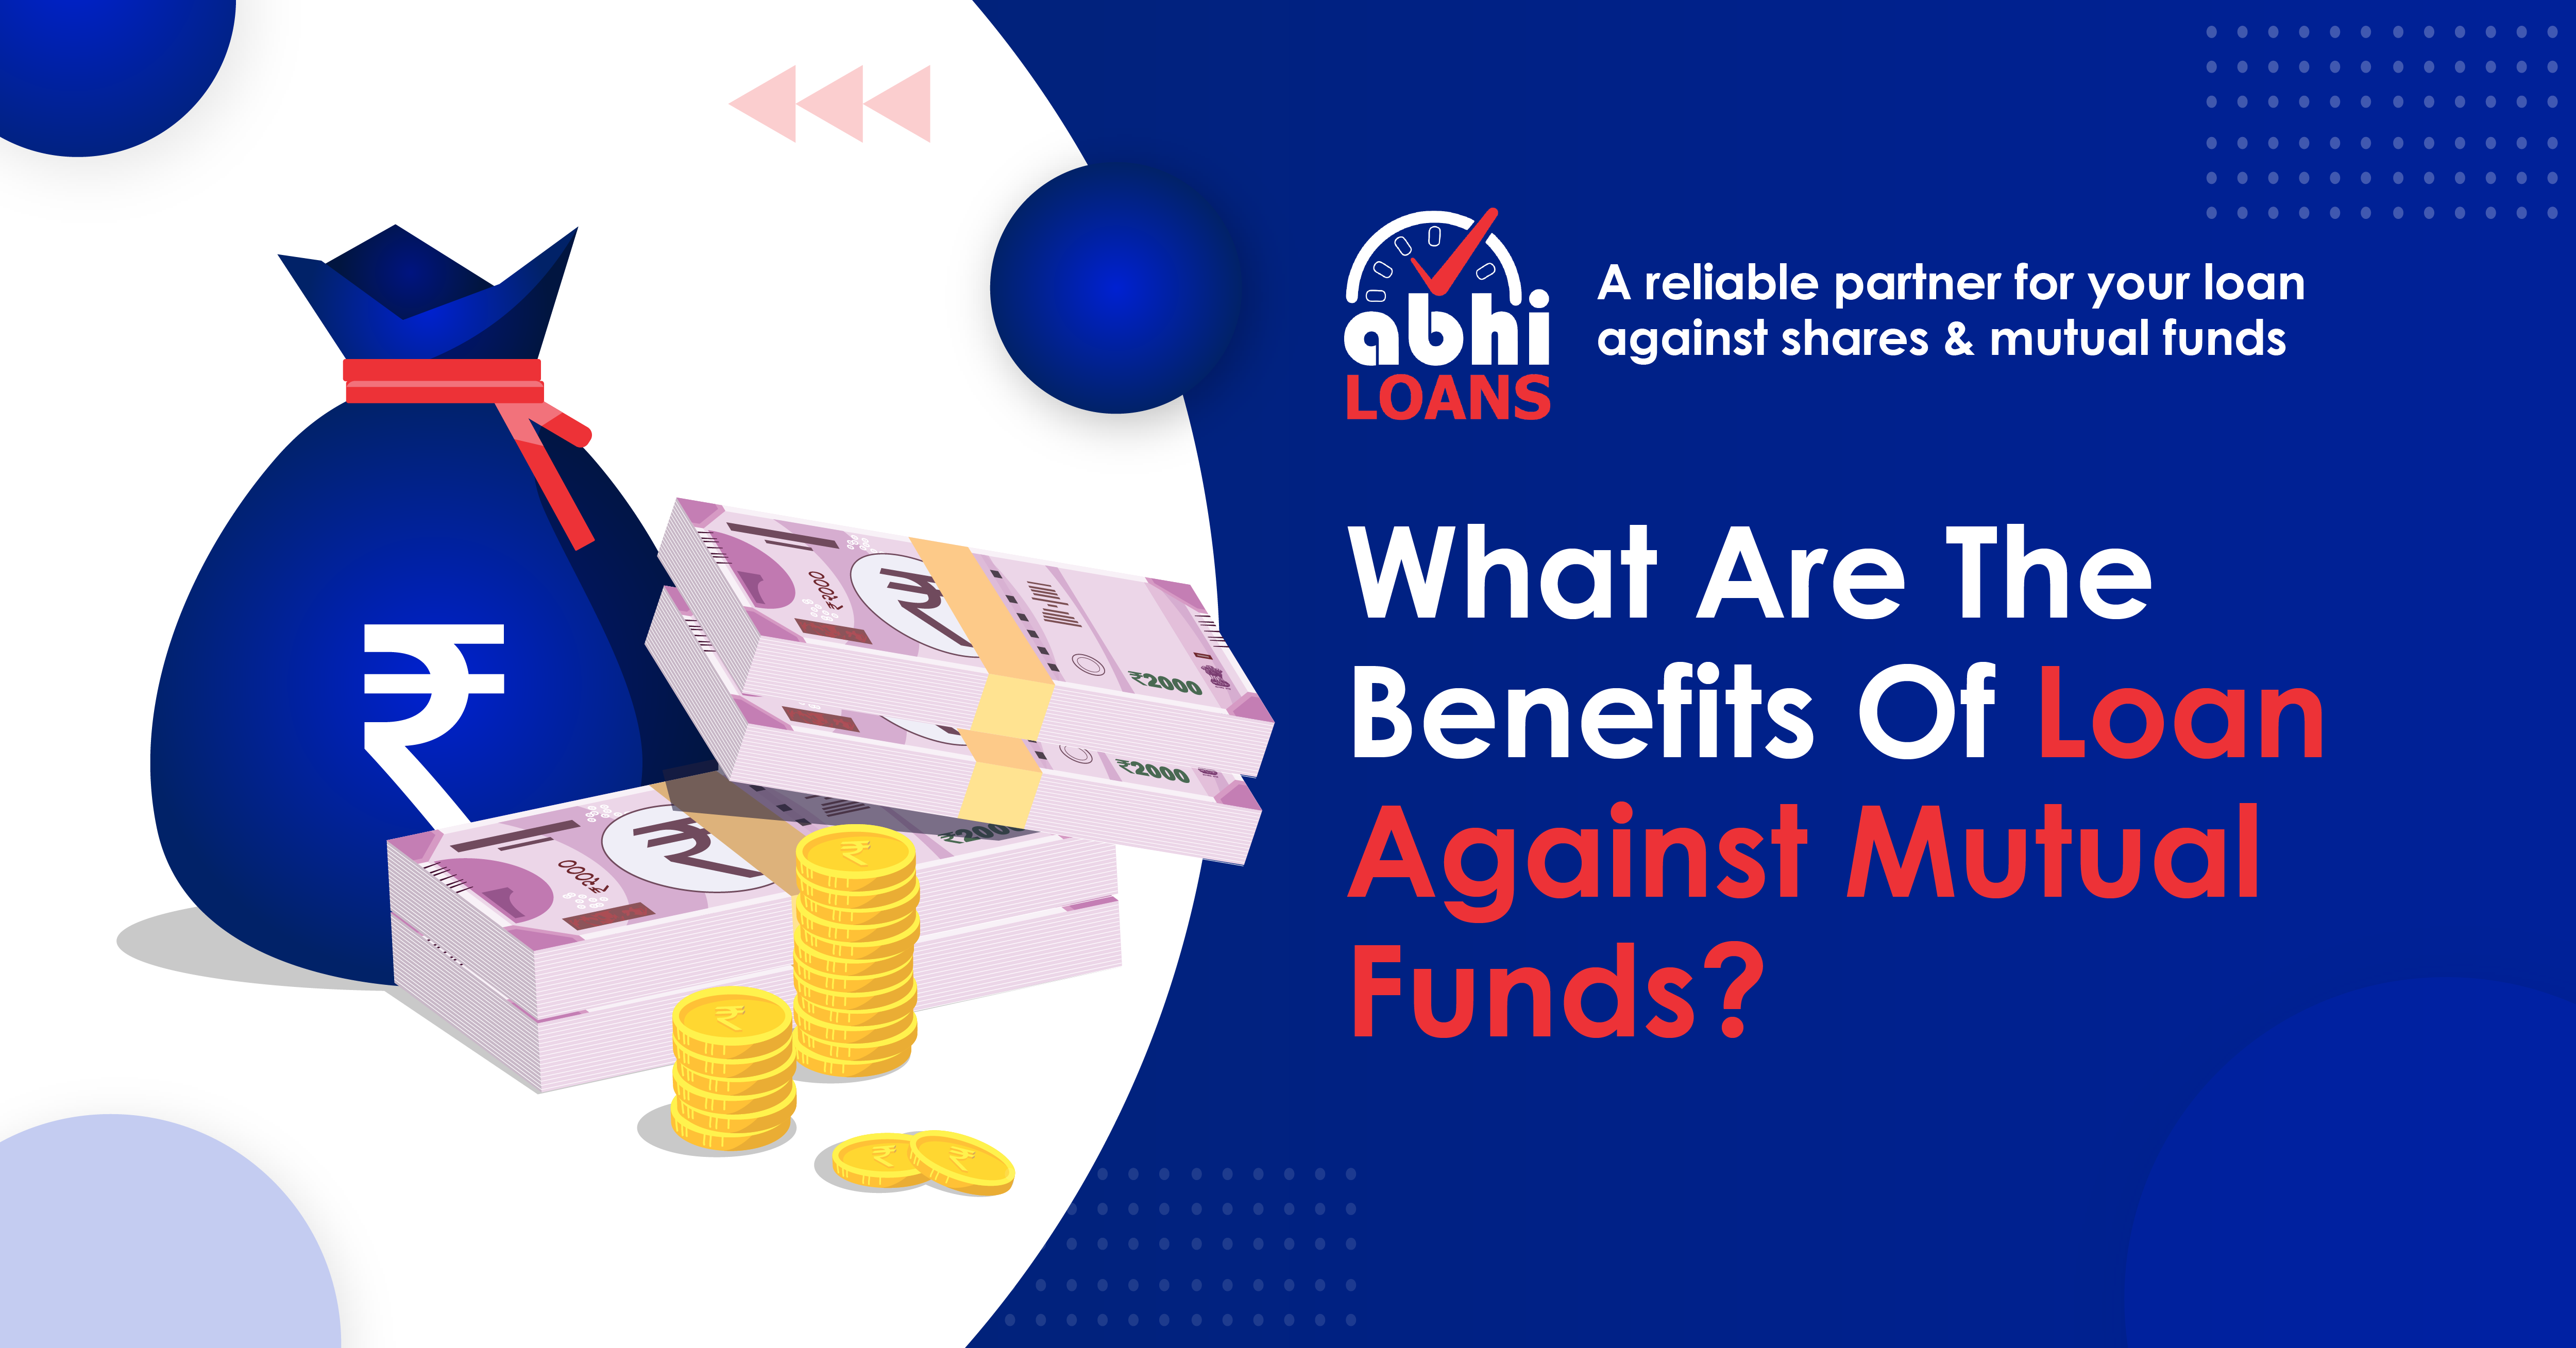 What Are The Benefits Of Loan Against Mutual Funds